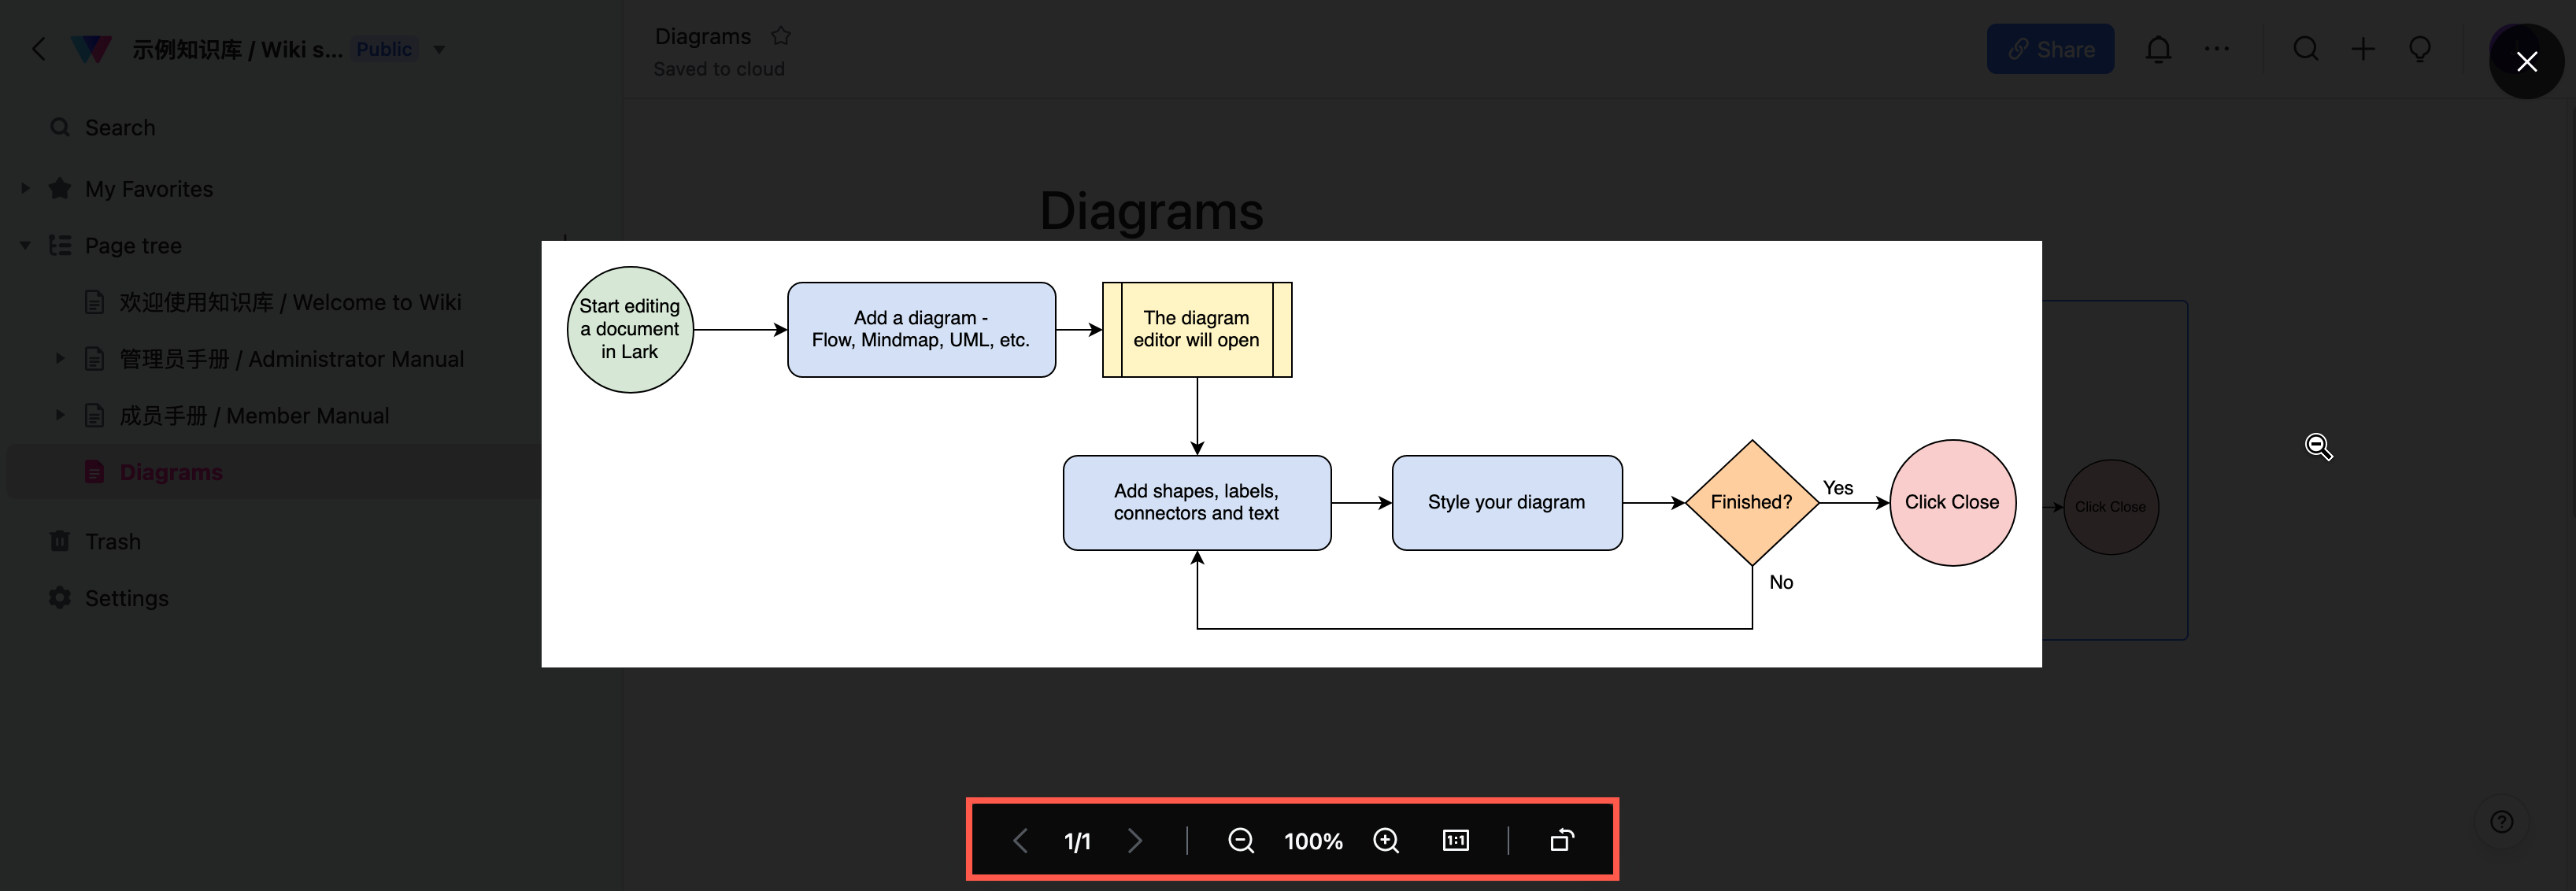 View a diagram in a Lark page in a distraction-free viewer